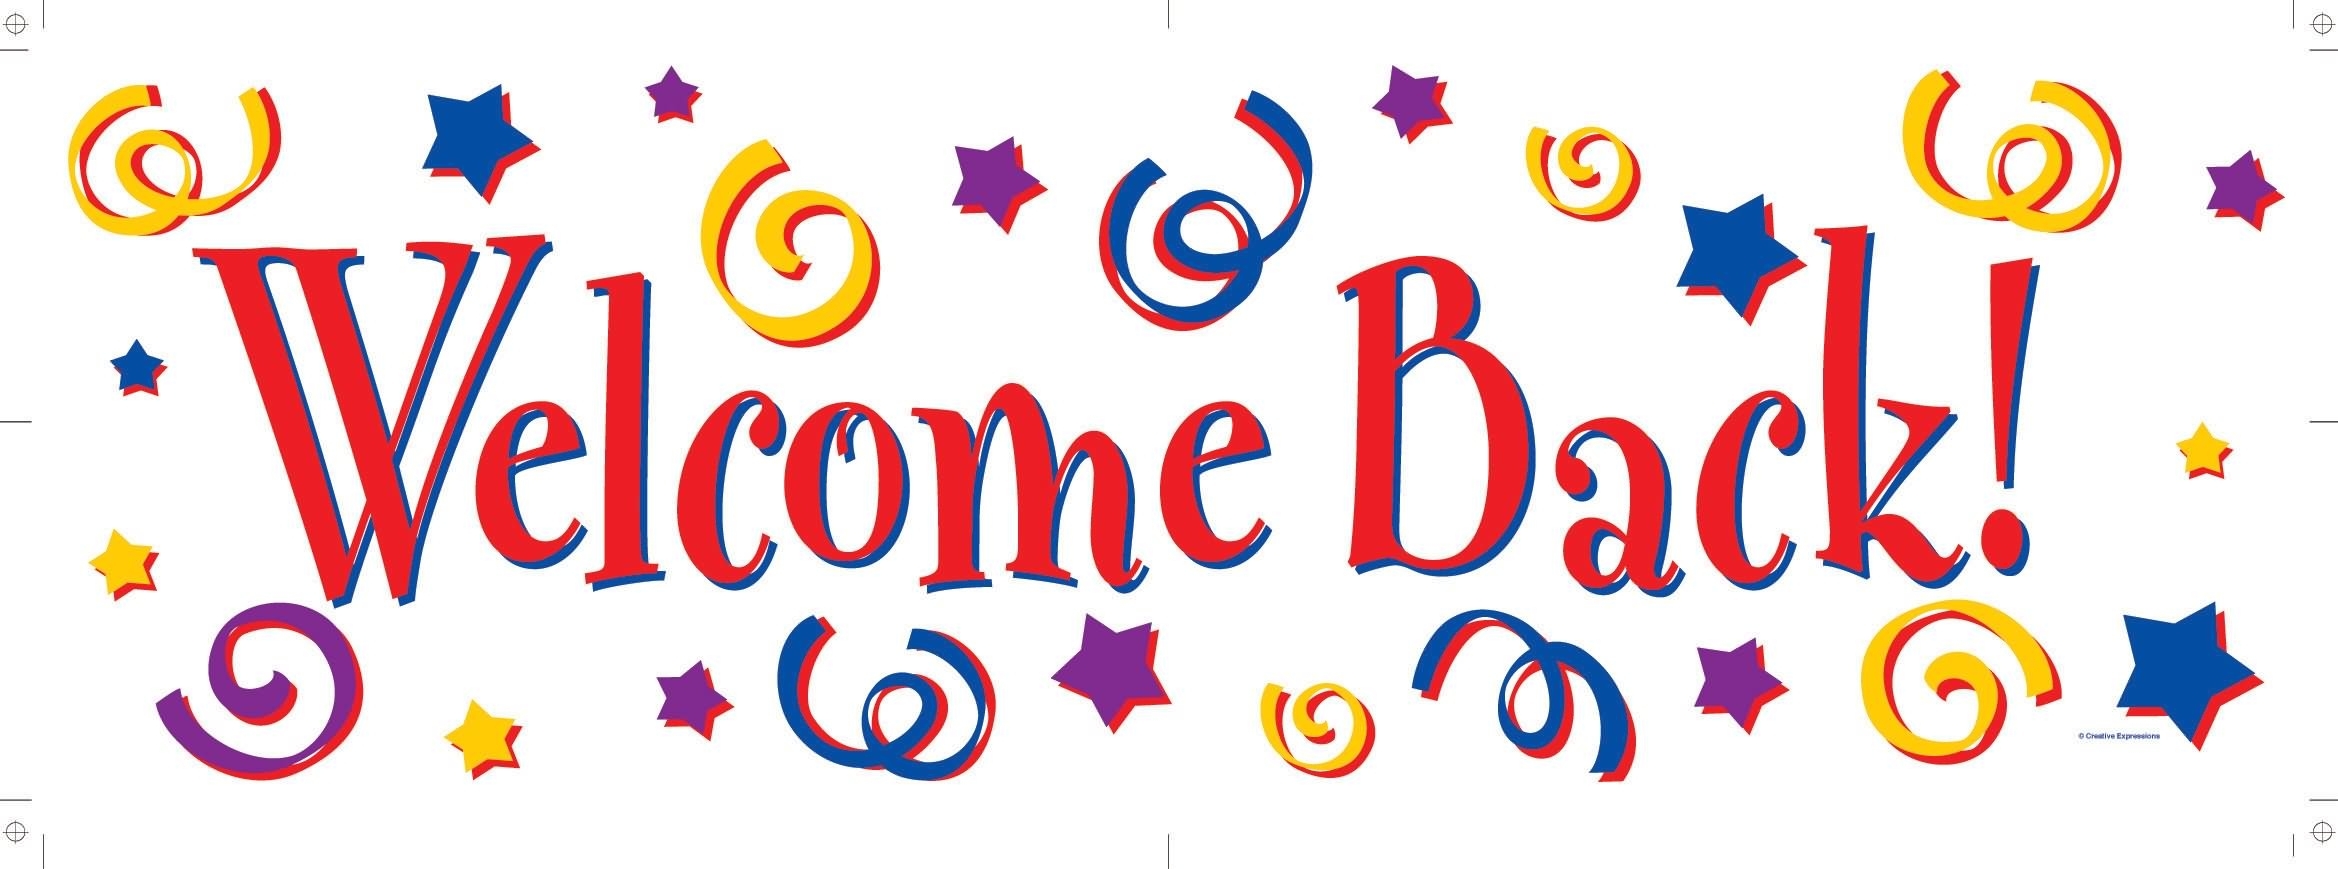 Welcome Clipart Animated - ClipArt Best - ClipArt Best